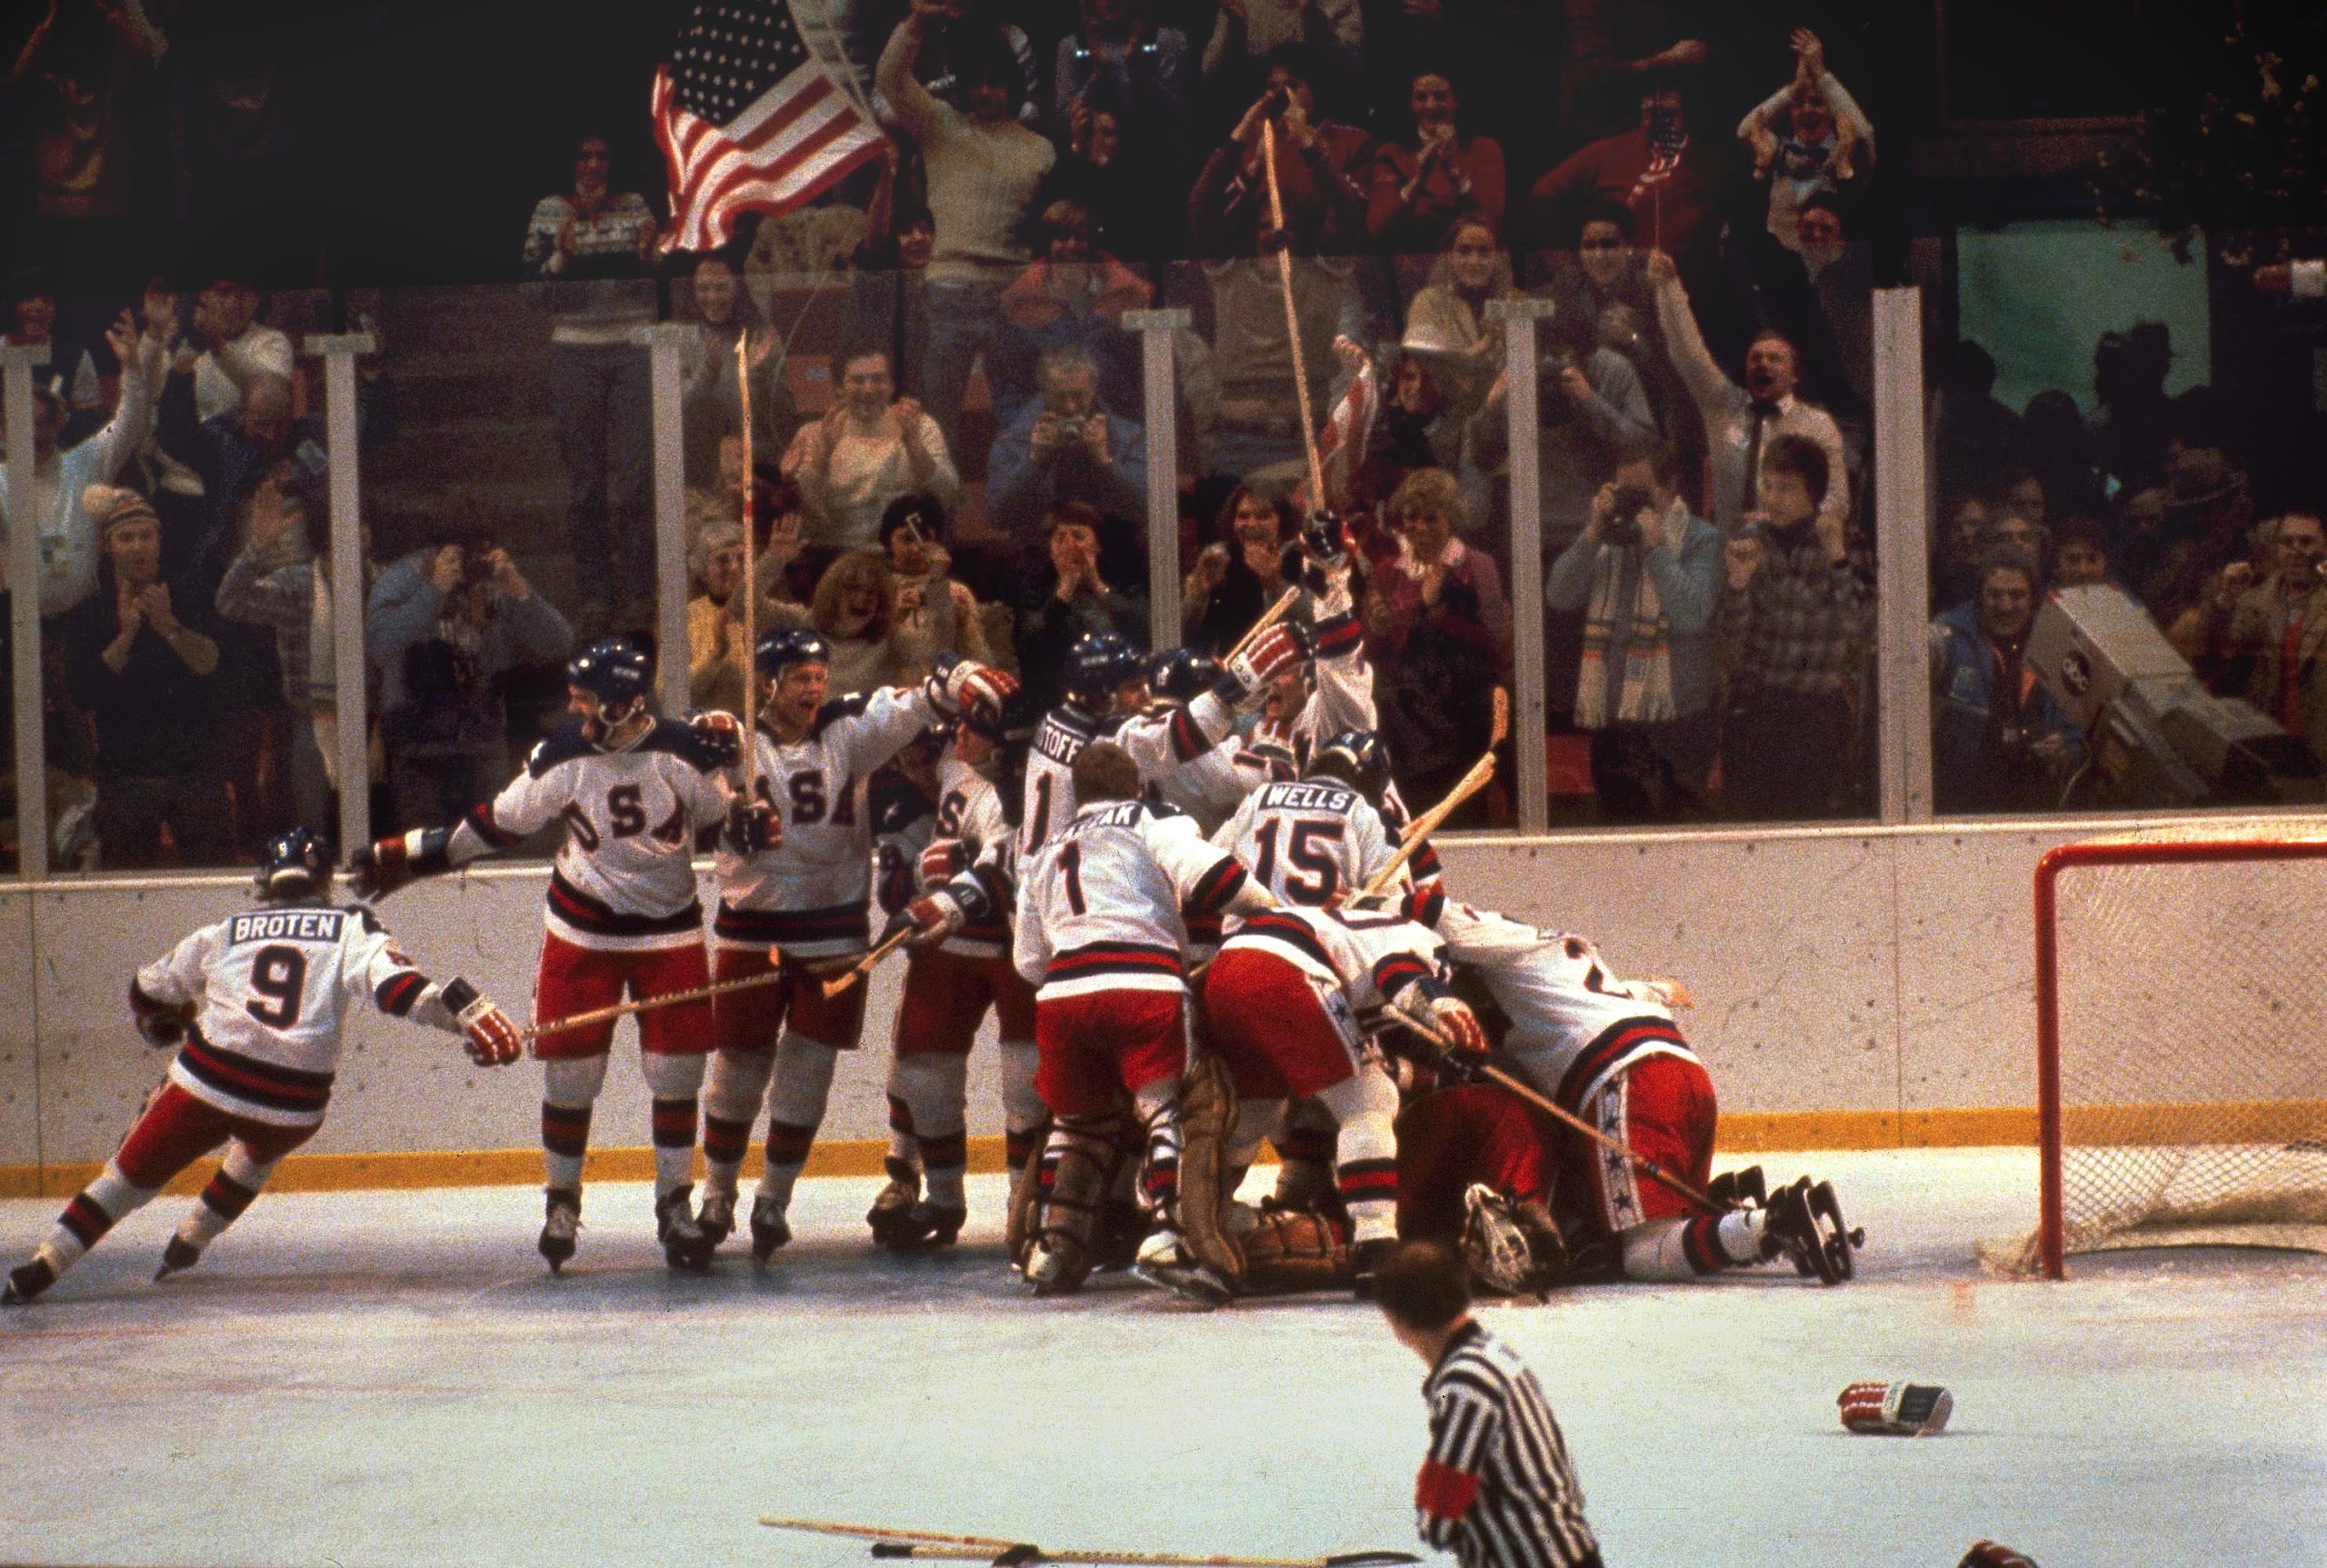 The U.S. hockey team pounces on goalie Jim Craig after a 4-3 victory against the Soviets in the 1980 Olympics, as a flag waves from the partisan Lake Placid, N.Y. crowd, February 22, 1980. (AP Photo)